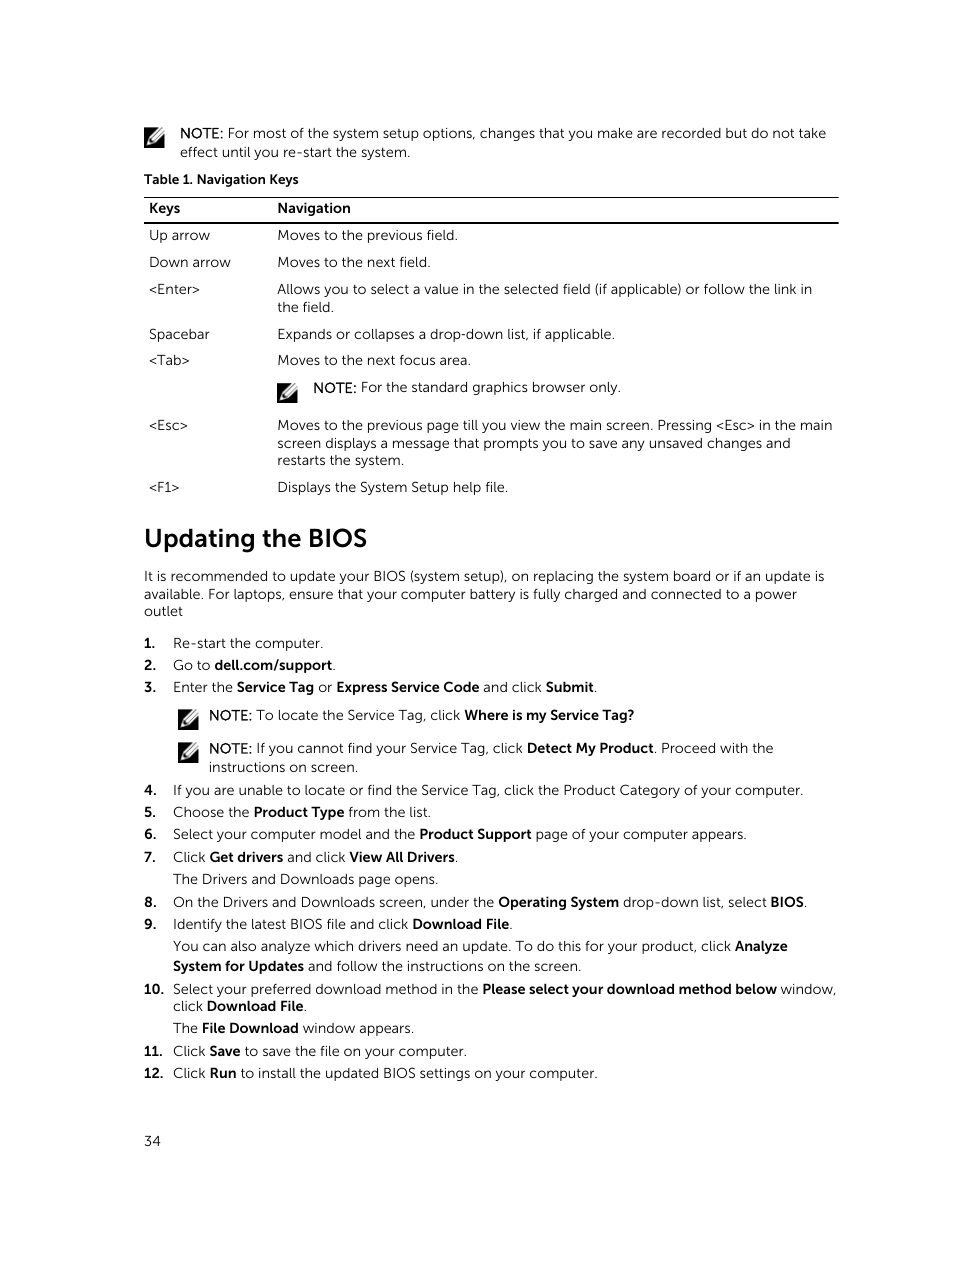 Updating the bios | Dell Vostro 14 (5480, Late 2014) User Manual | Page 34  / 45